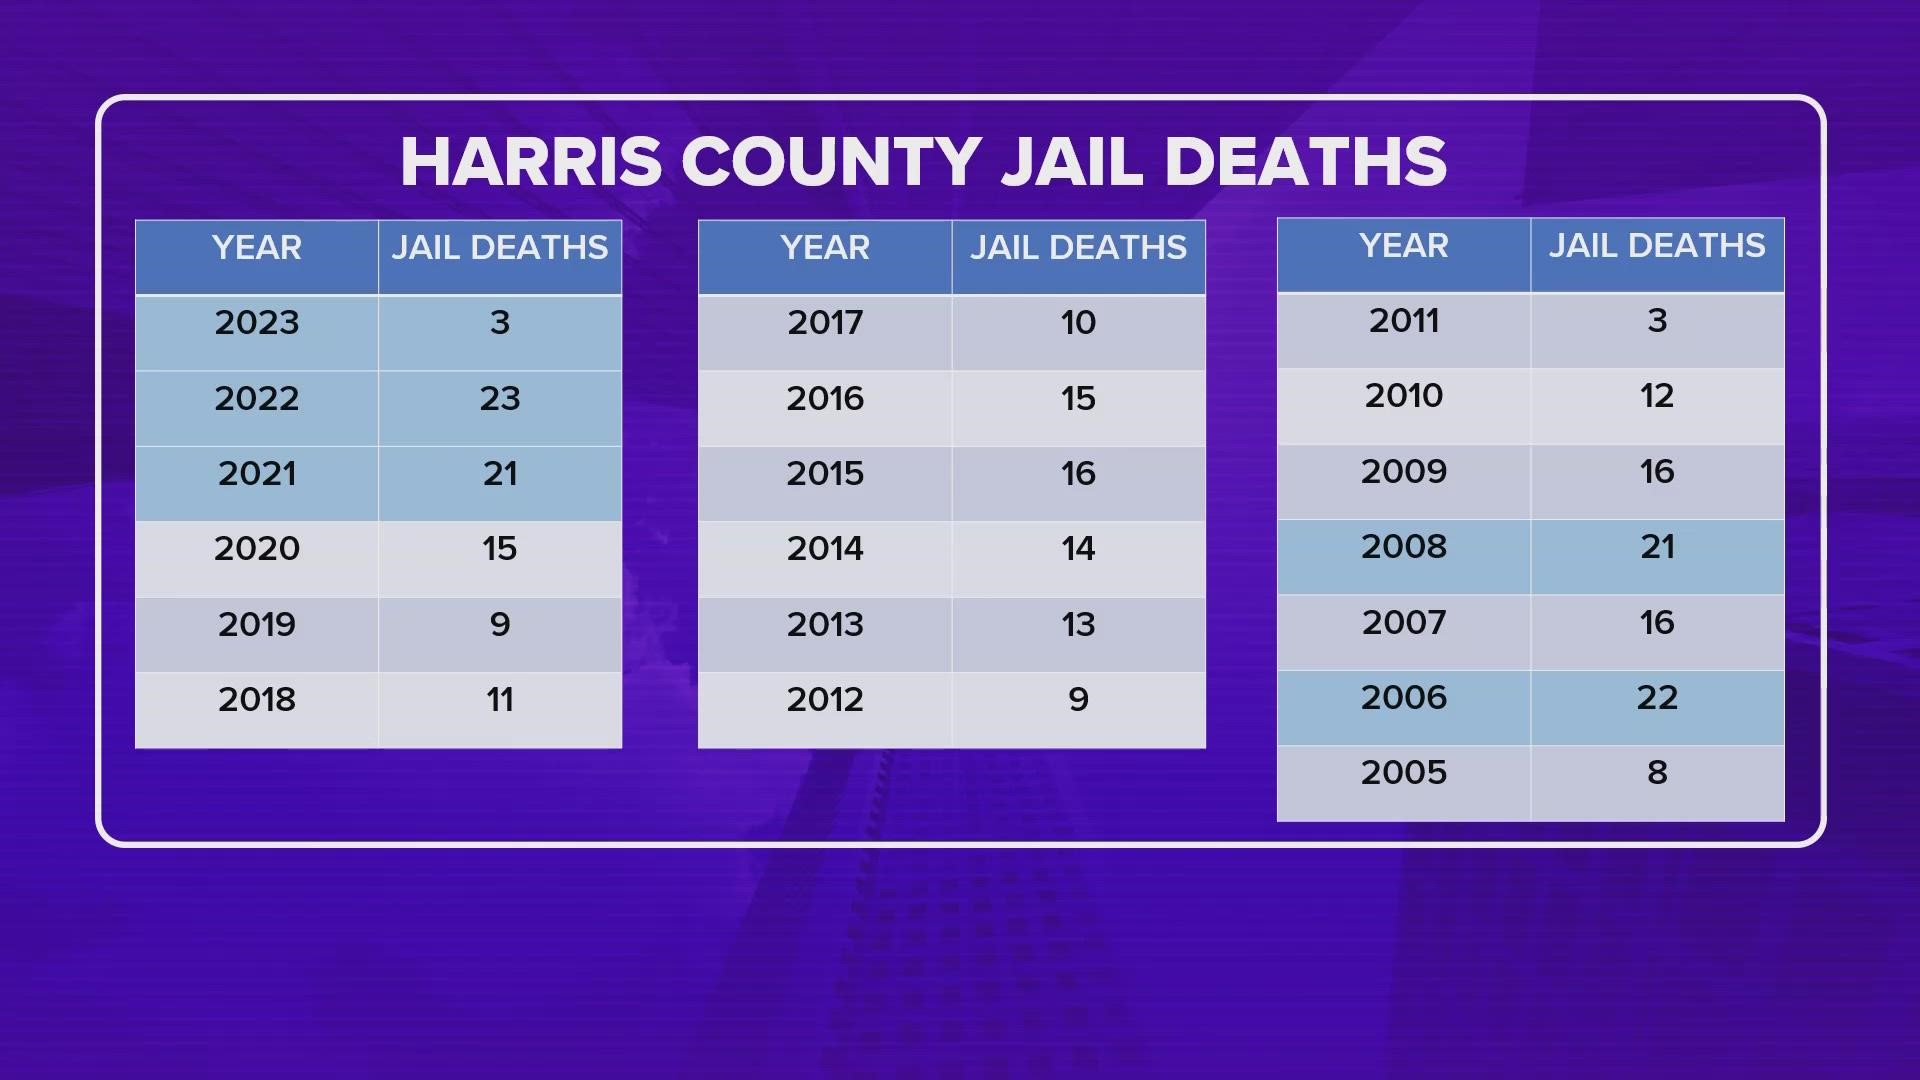 Inmate deaths inside the Harris County jail facilities rose to more than 20 in both 2021 and 2022, according to TDCJ.